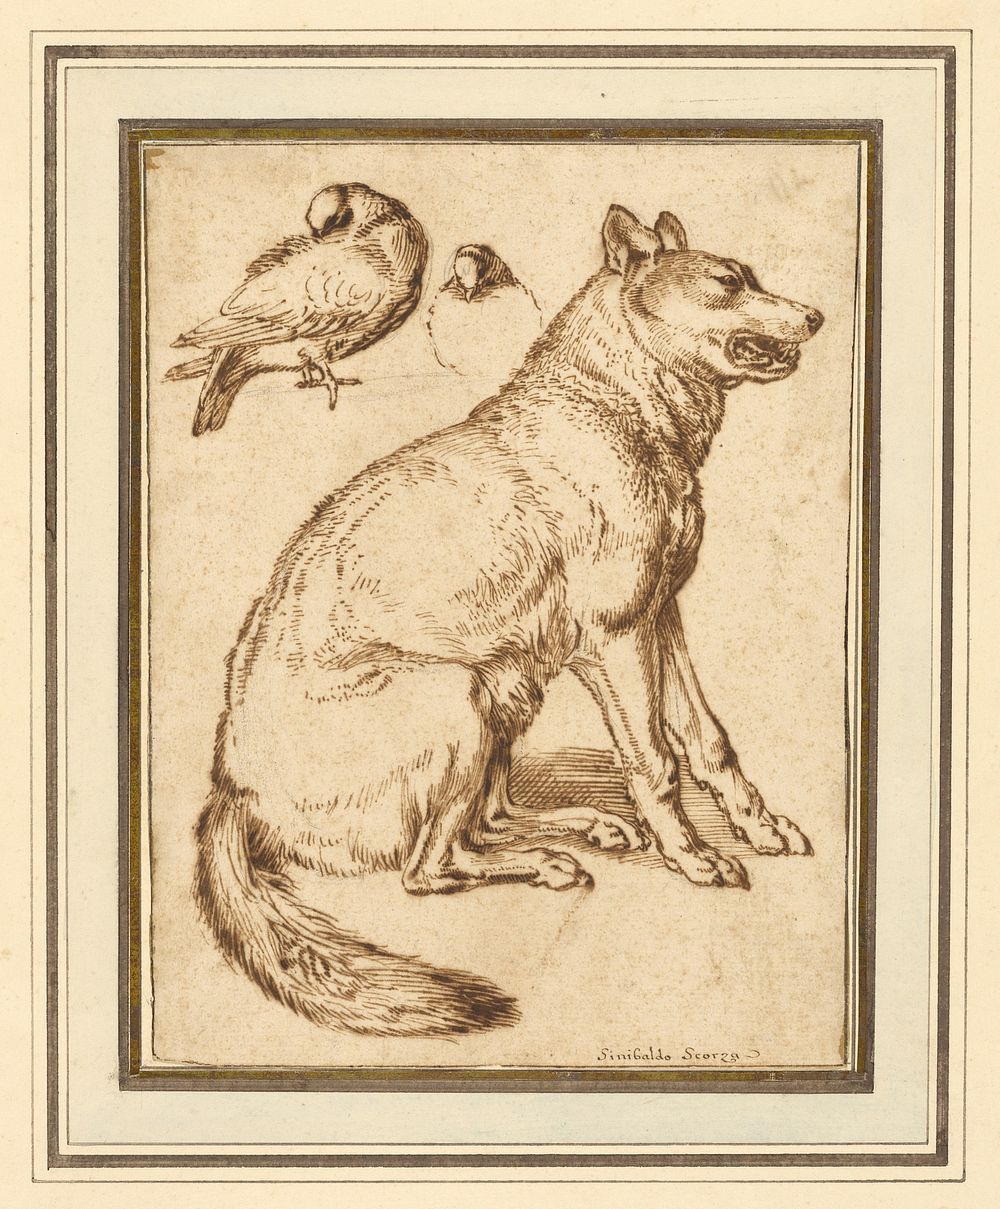 A Wolf and Two Doves by Sinibaldo Scorza